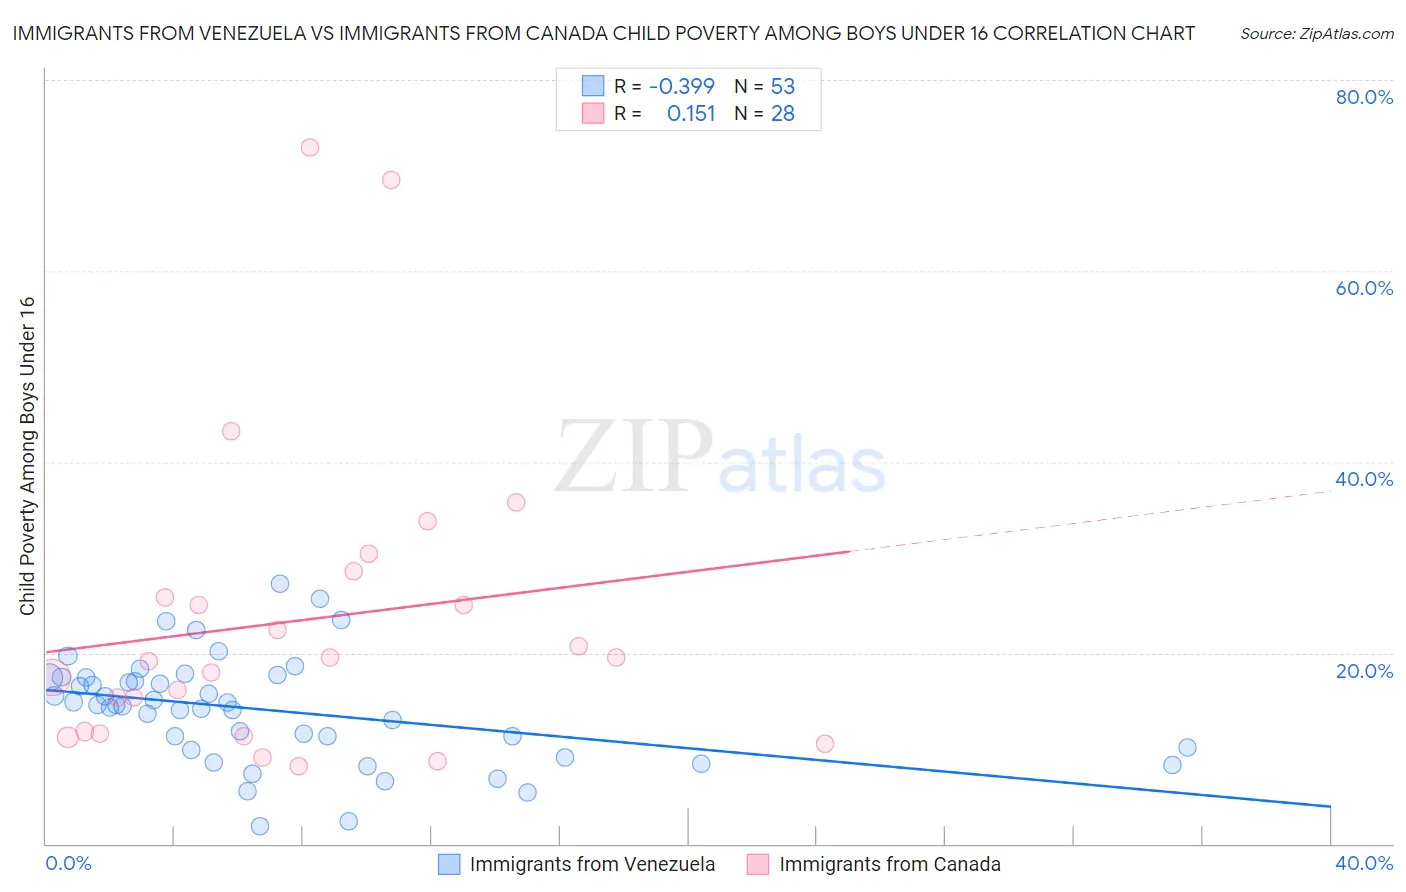 Immigrants from Venezuela vs Immigrants from Canada Child Poverty Among Boys Under 16